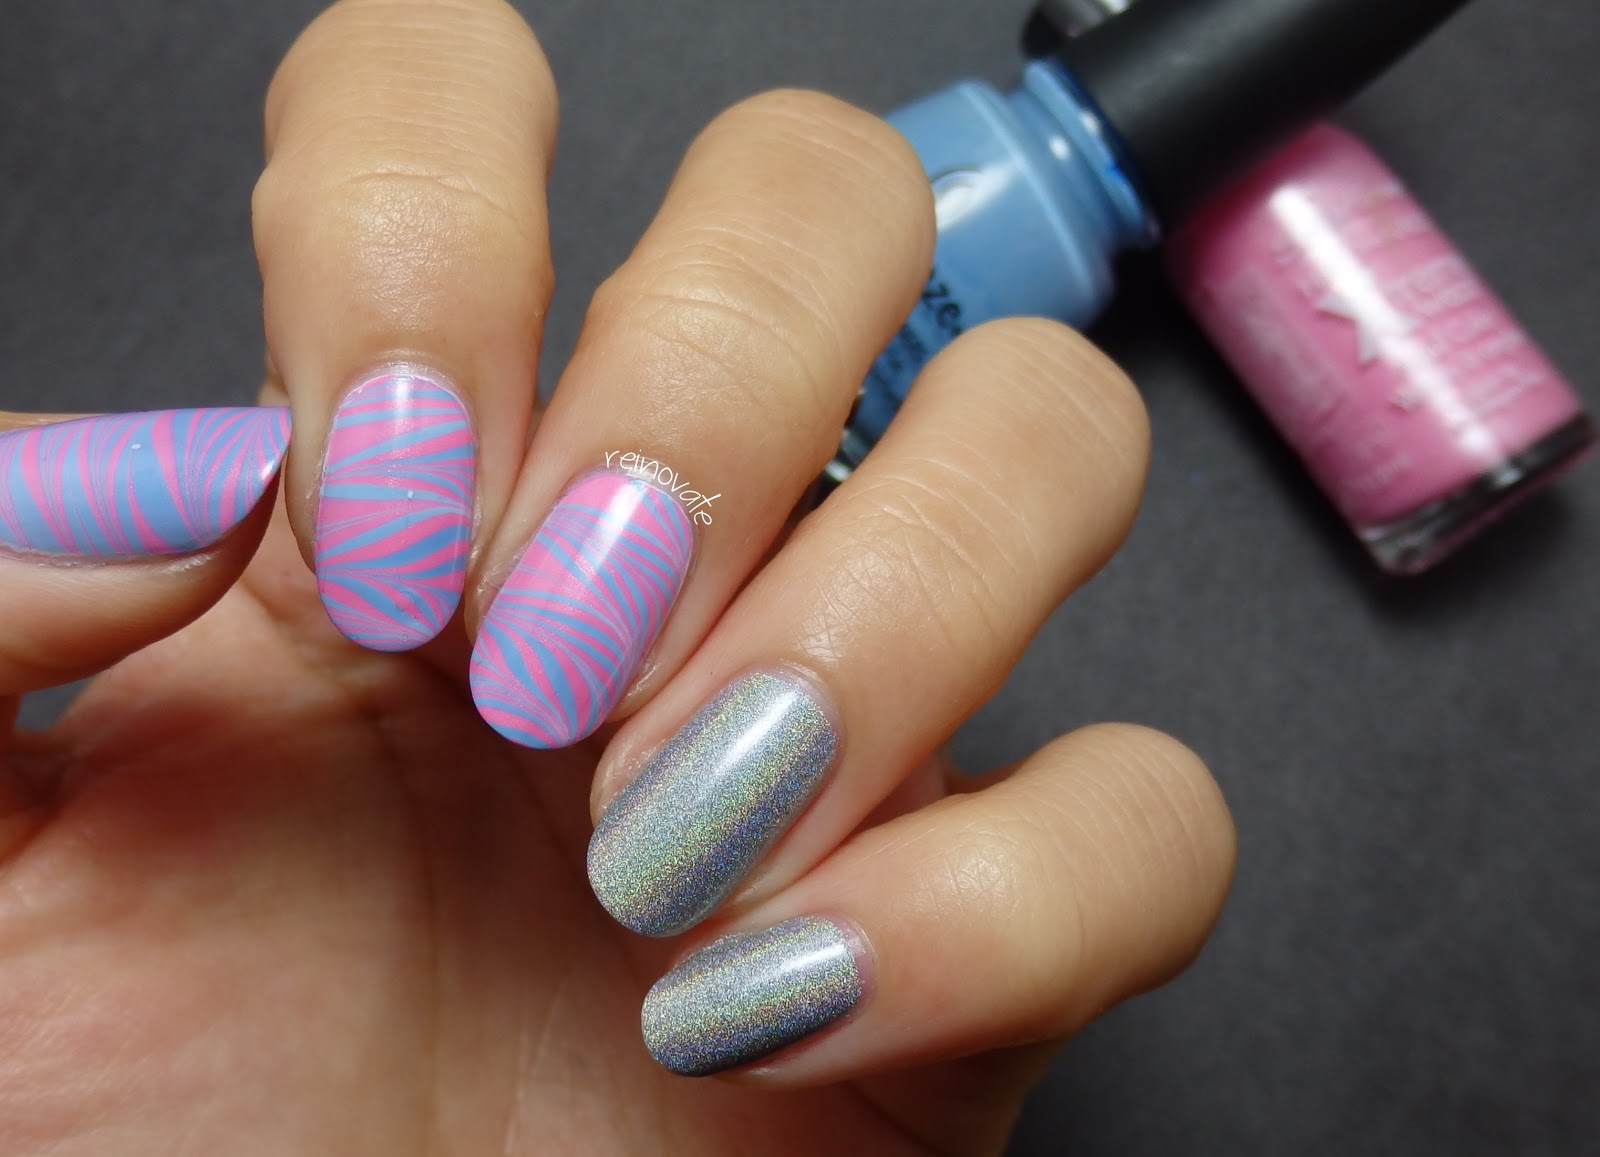 1. Spring Nail Art Ideas for April - wide 2